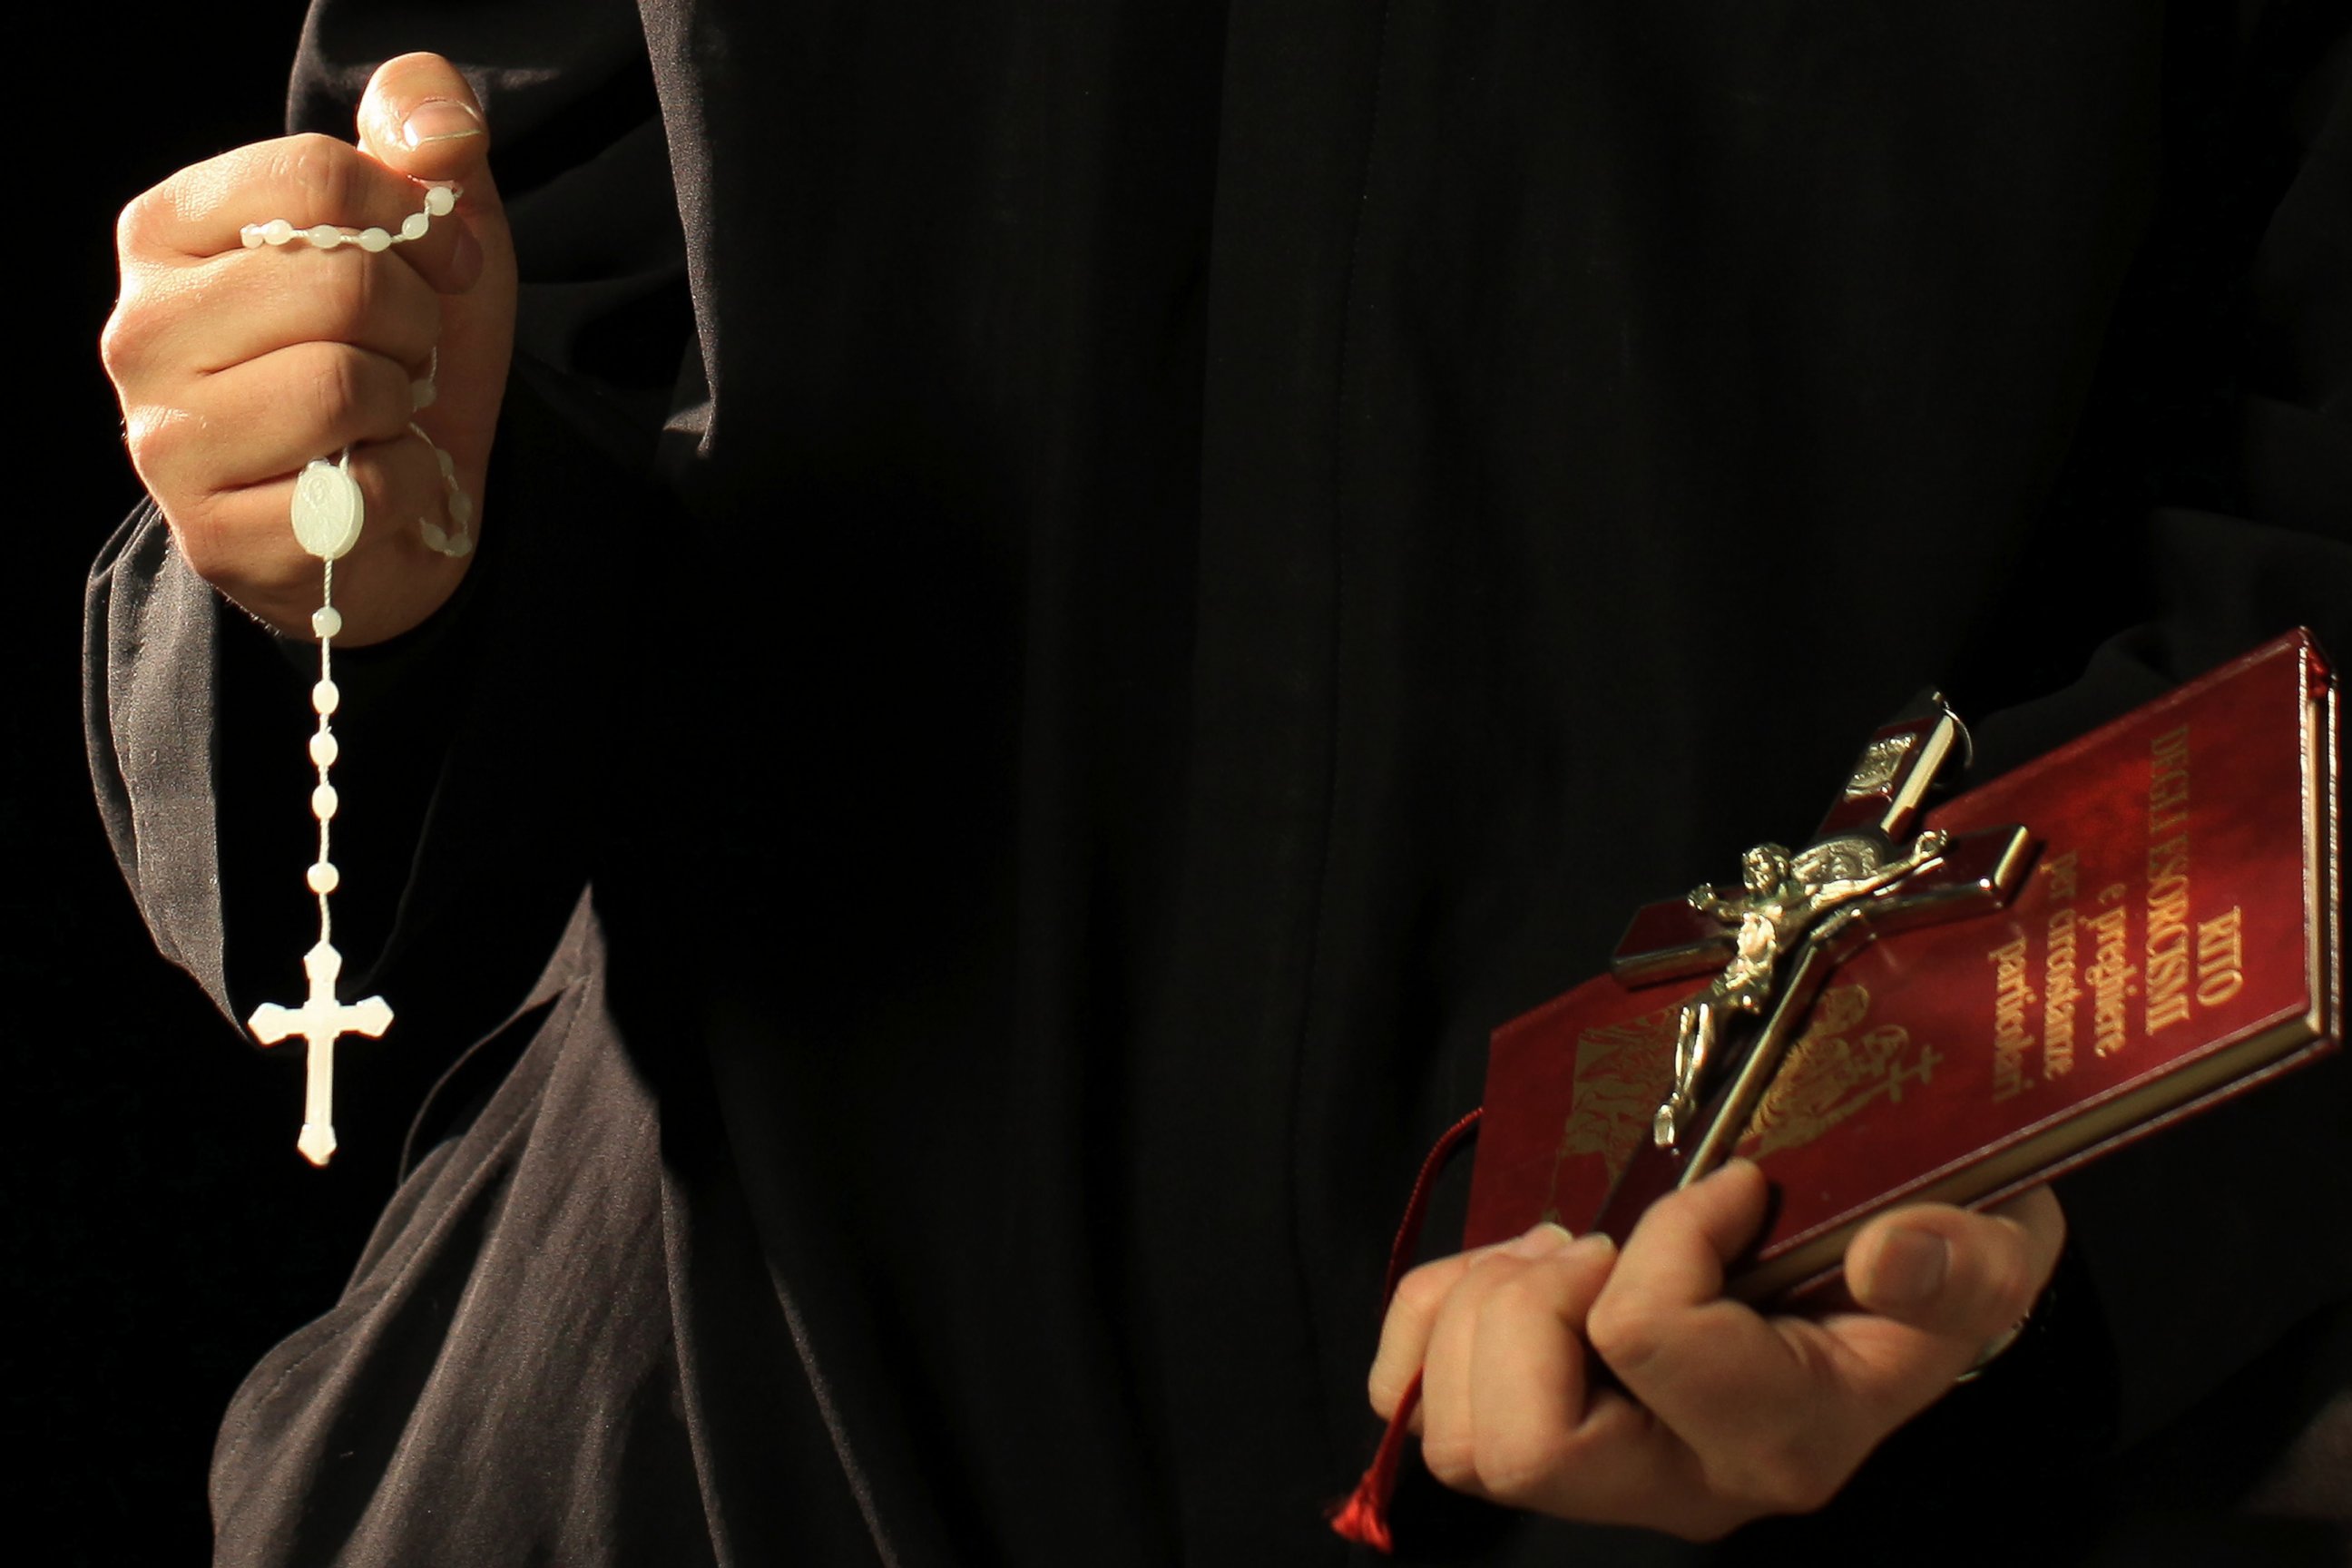 PHOTO: Don Aldo Buonaiuto holds the necessary objects for his exorcisms on Jan. 12, 2012 in Rome, Italy. 